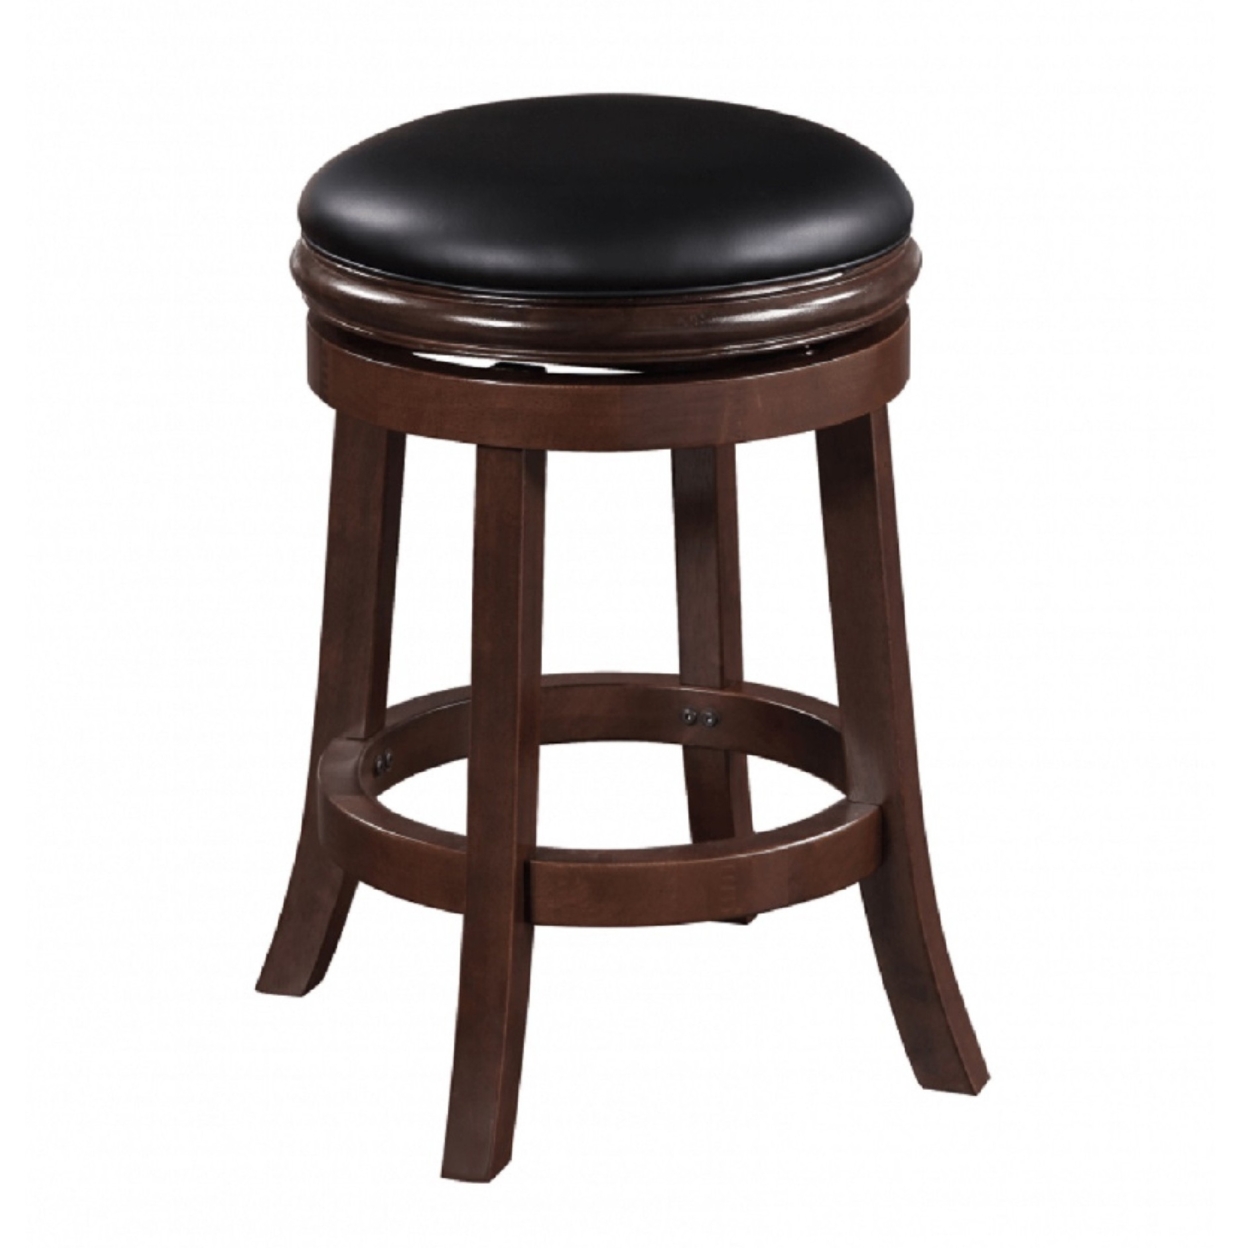 Sabi 24 Inch Swivel Counter Stool, Backless, Solid Wood, Faux Leather, Espresso Brown, Black